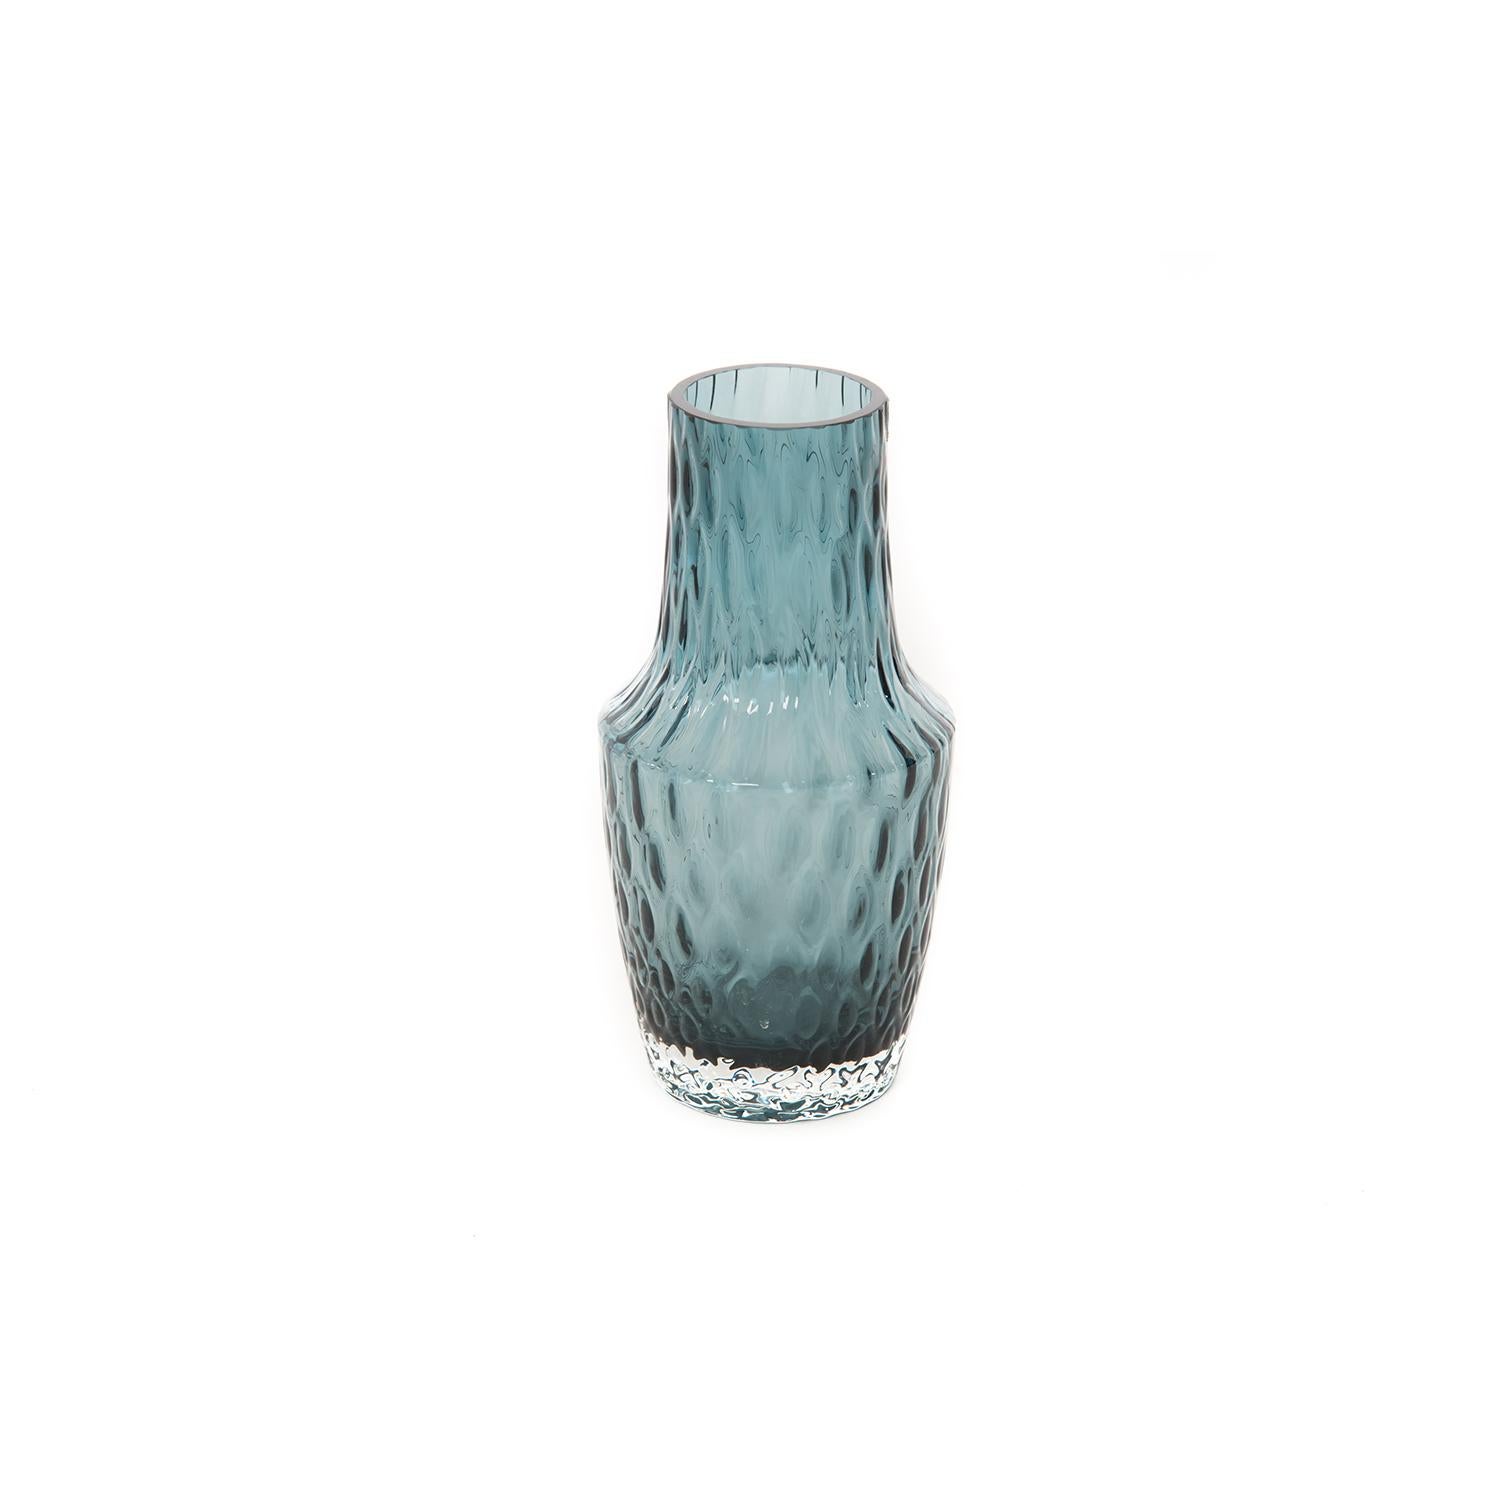 Slate blue Finnish modern vase with dimples. Perfect for your favourite fresh cut flowers!